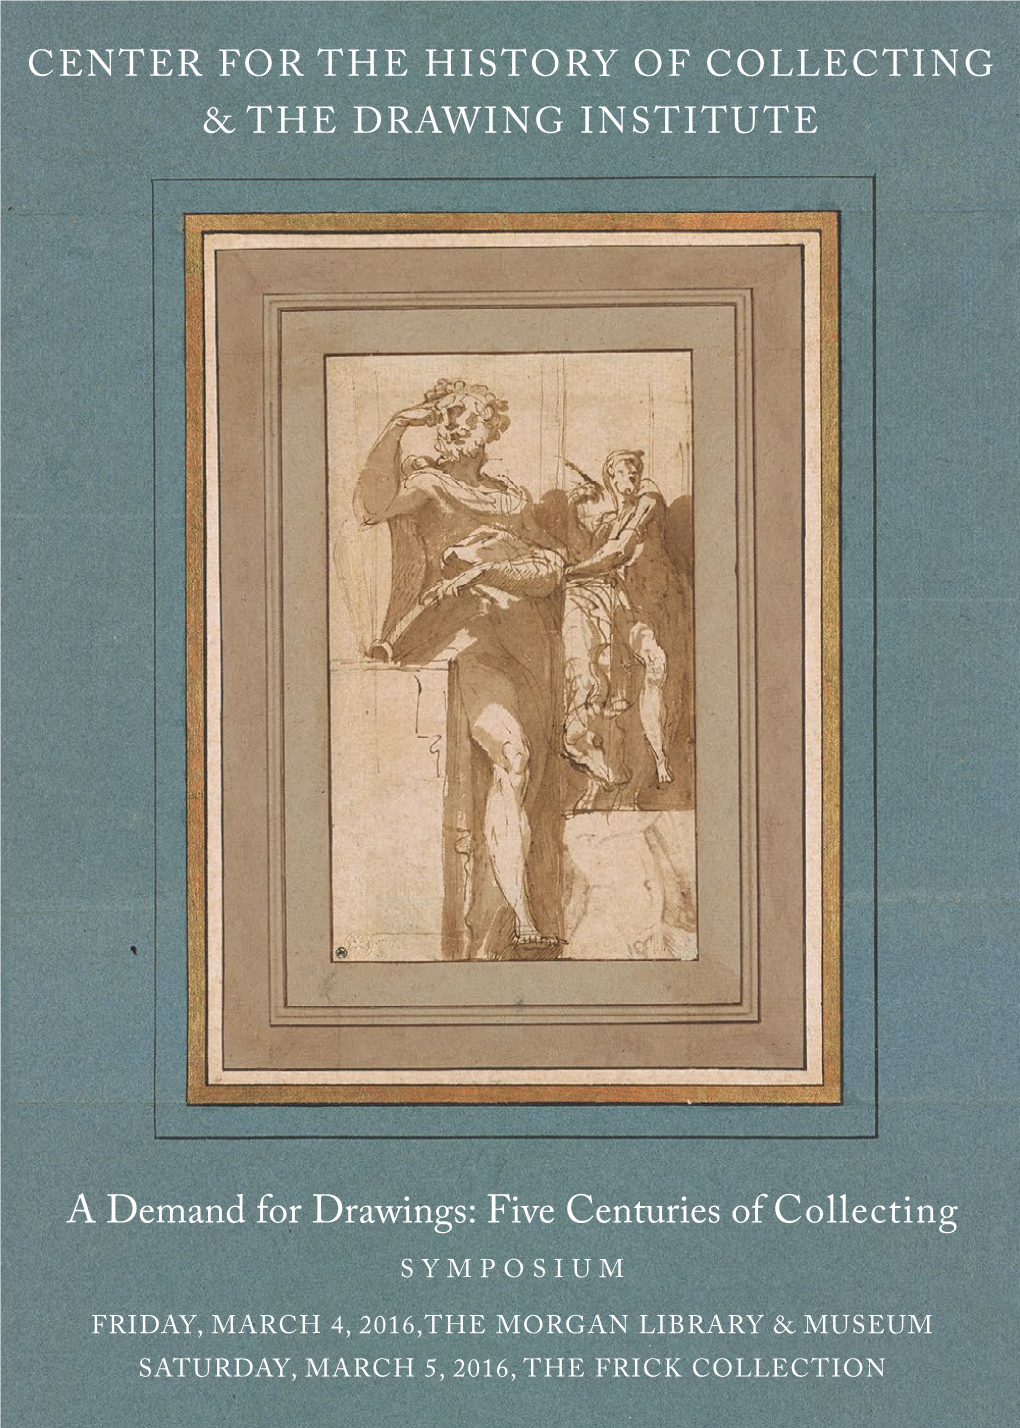 A Demand for Drawings: Five Centuries of Collecting SYMPOSIUM